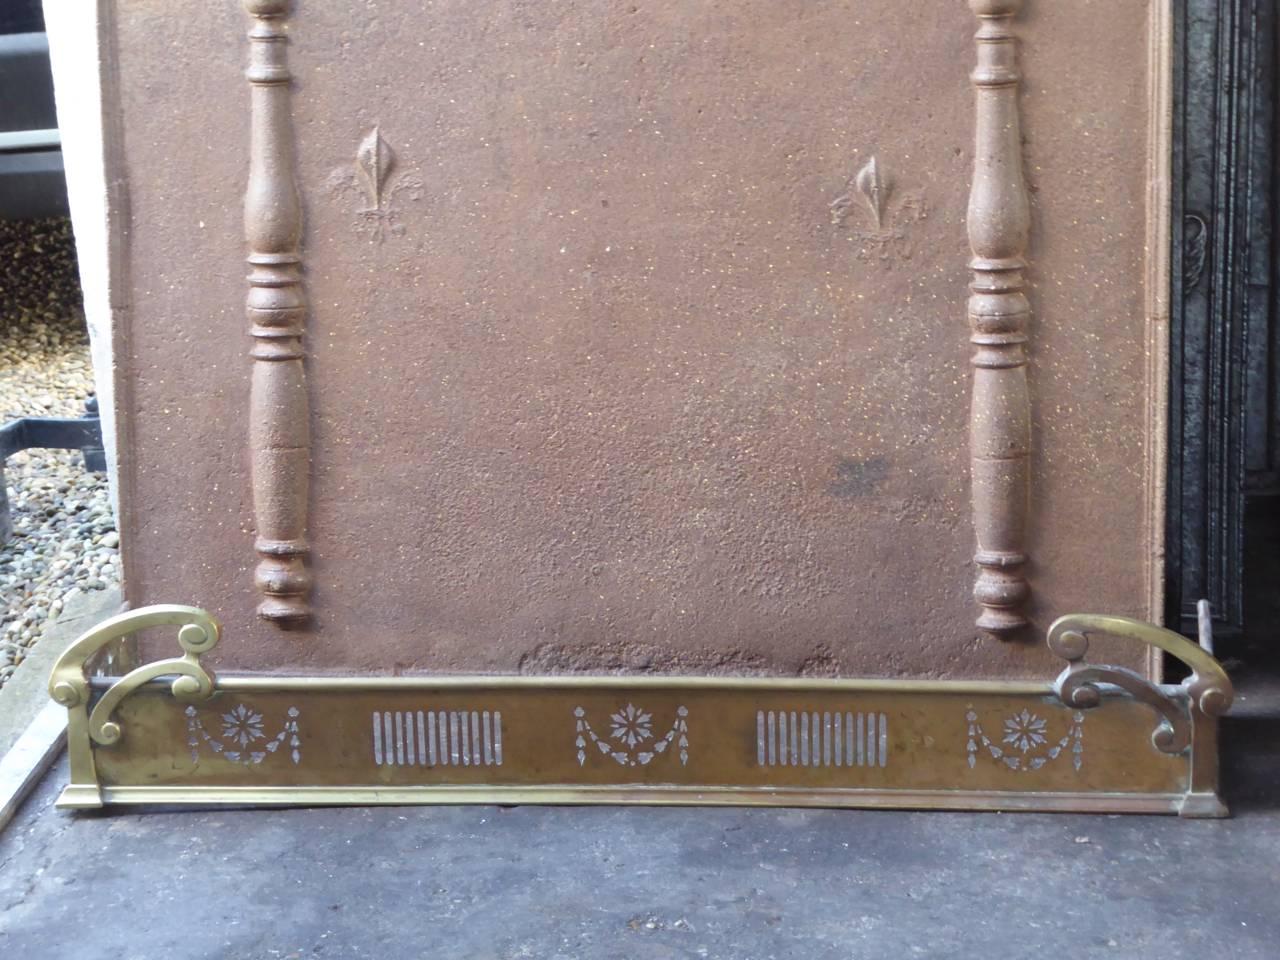 Early 20th century English fire fender made of brass. Art Nouveau period. The fender is in a good condition.
